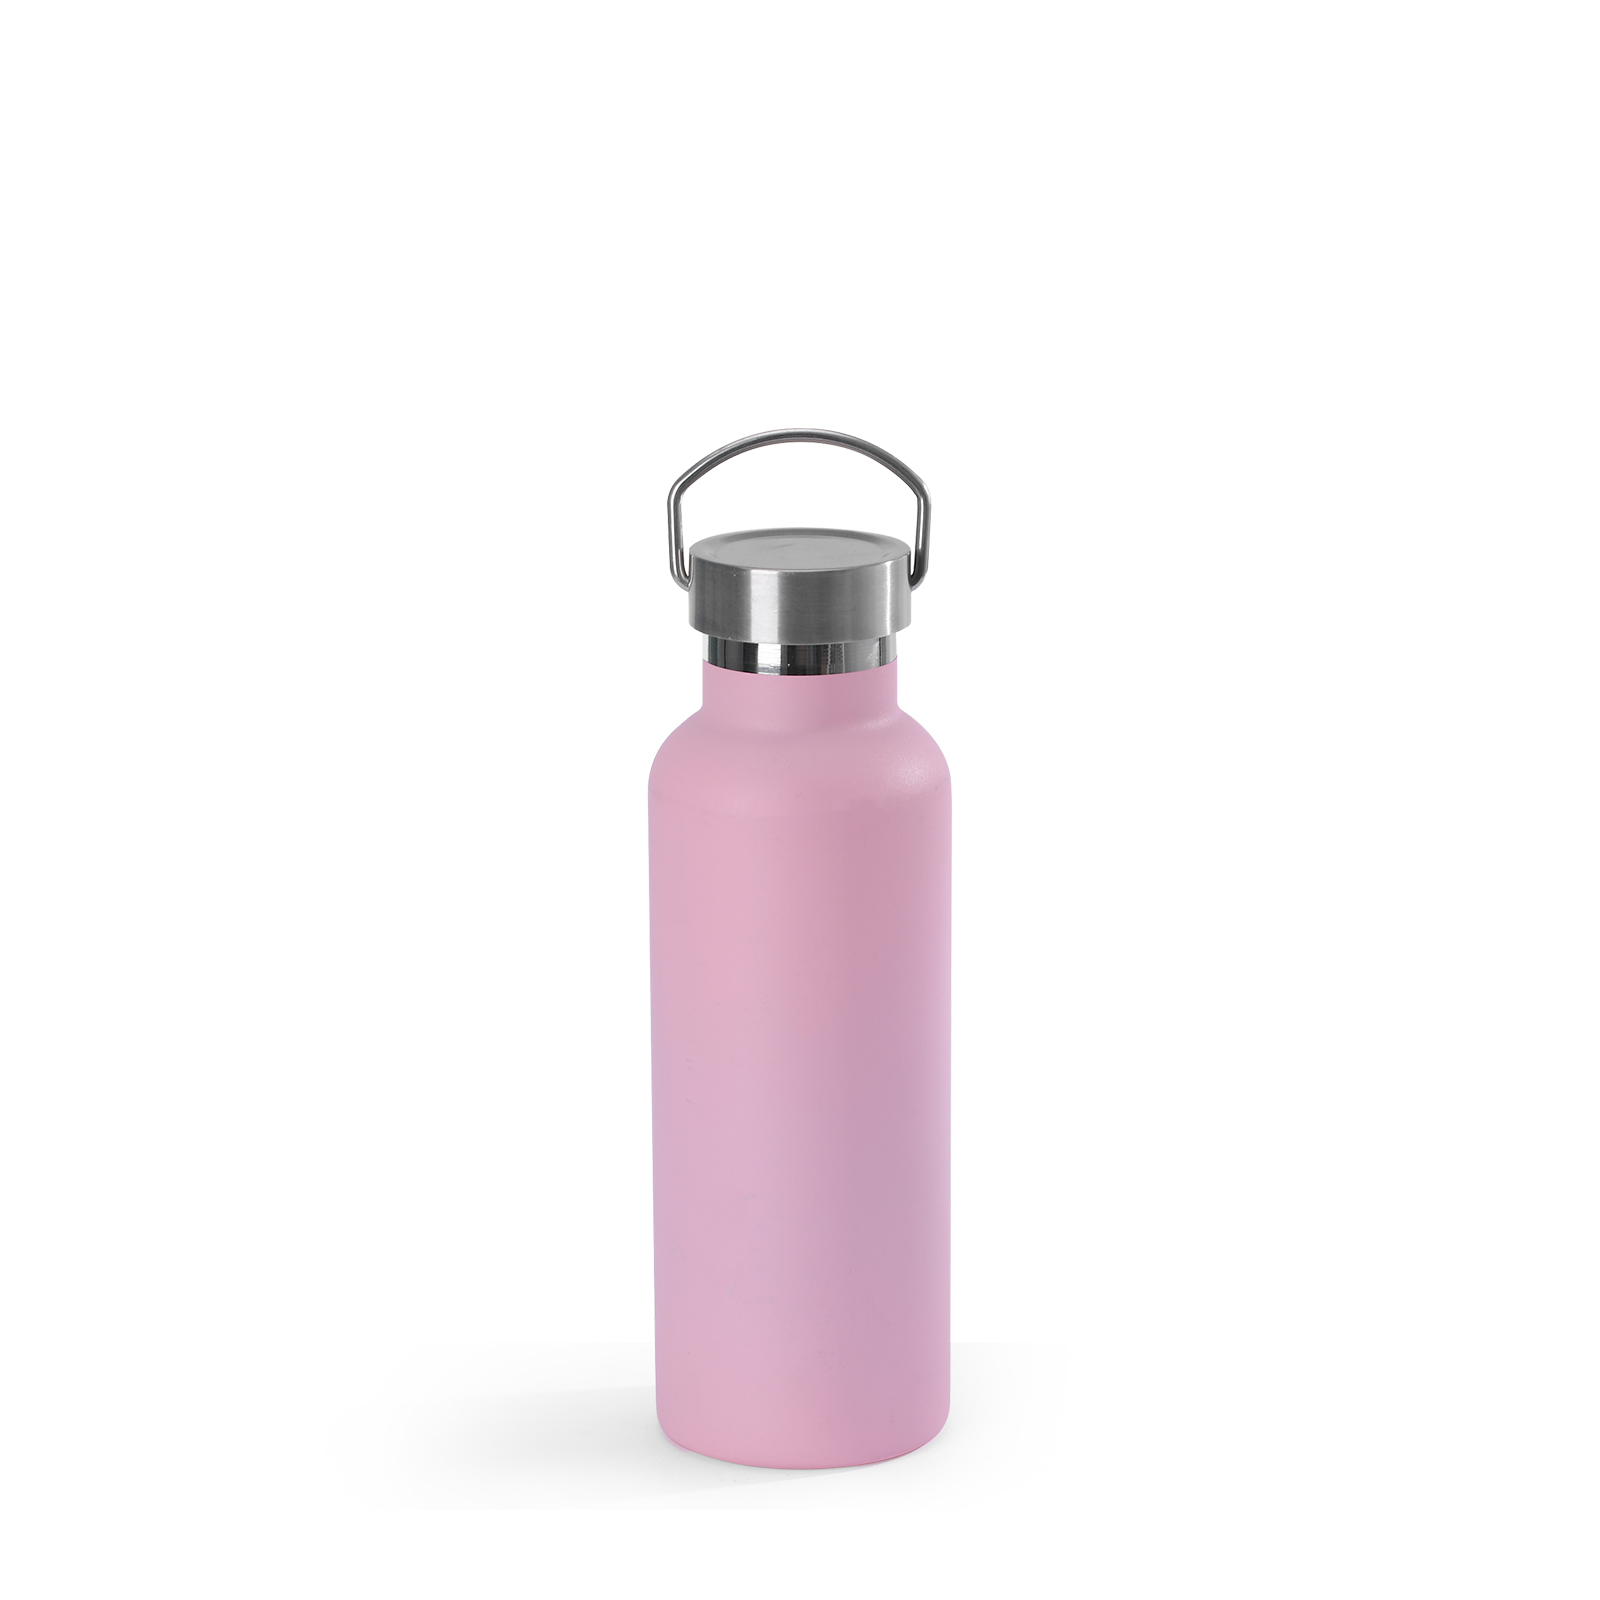 Stainless steel water bottle Standard mouth